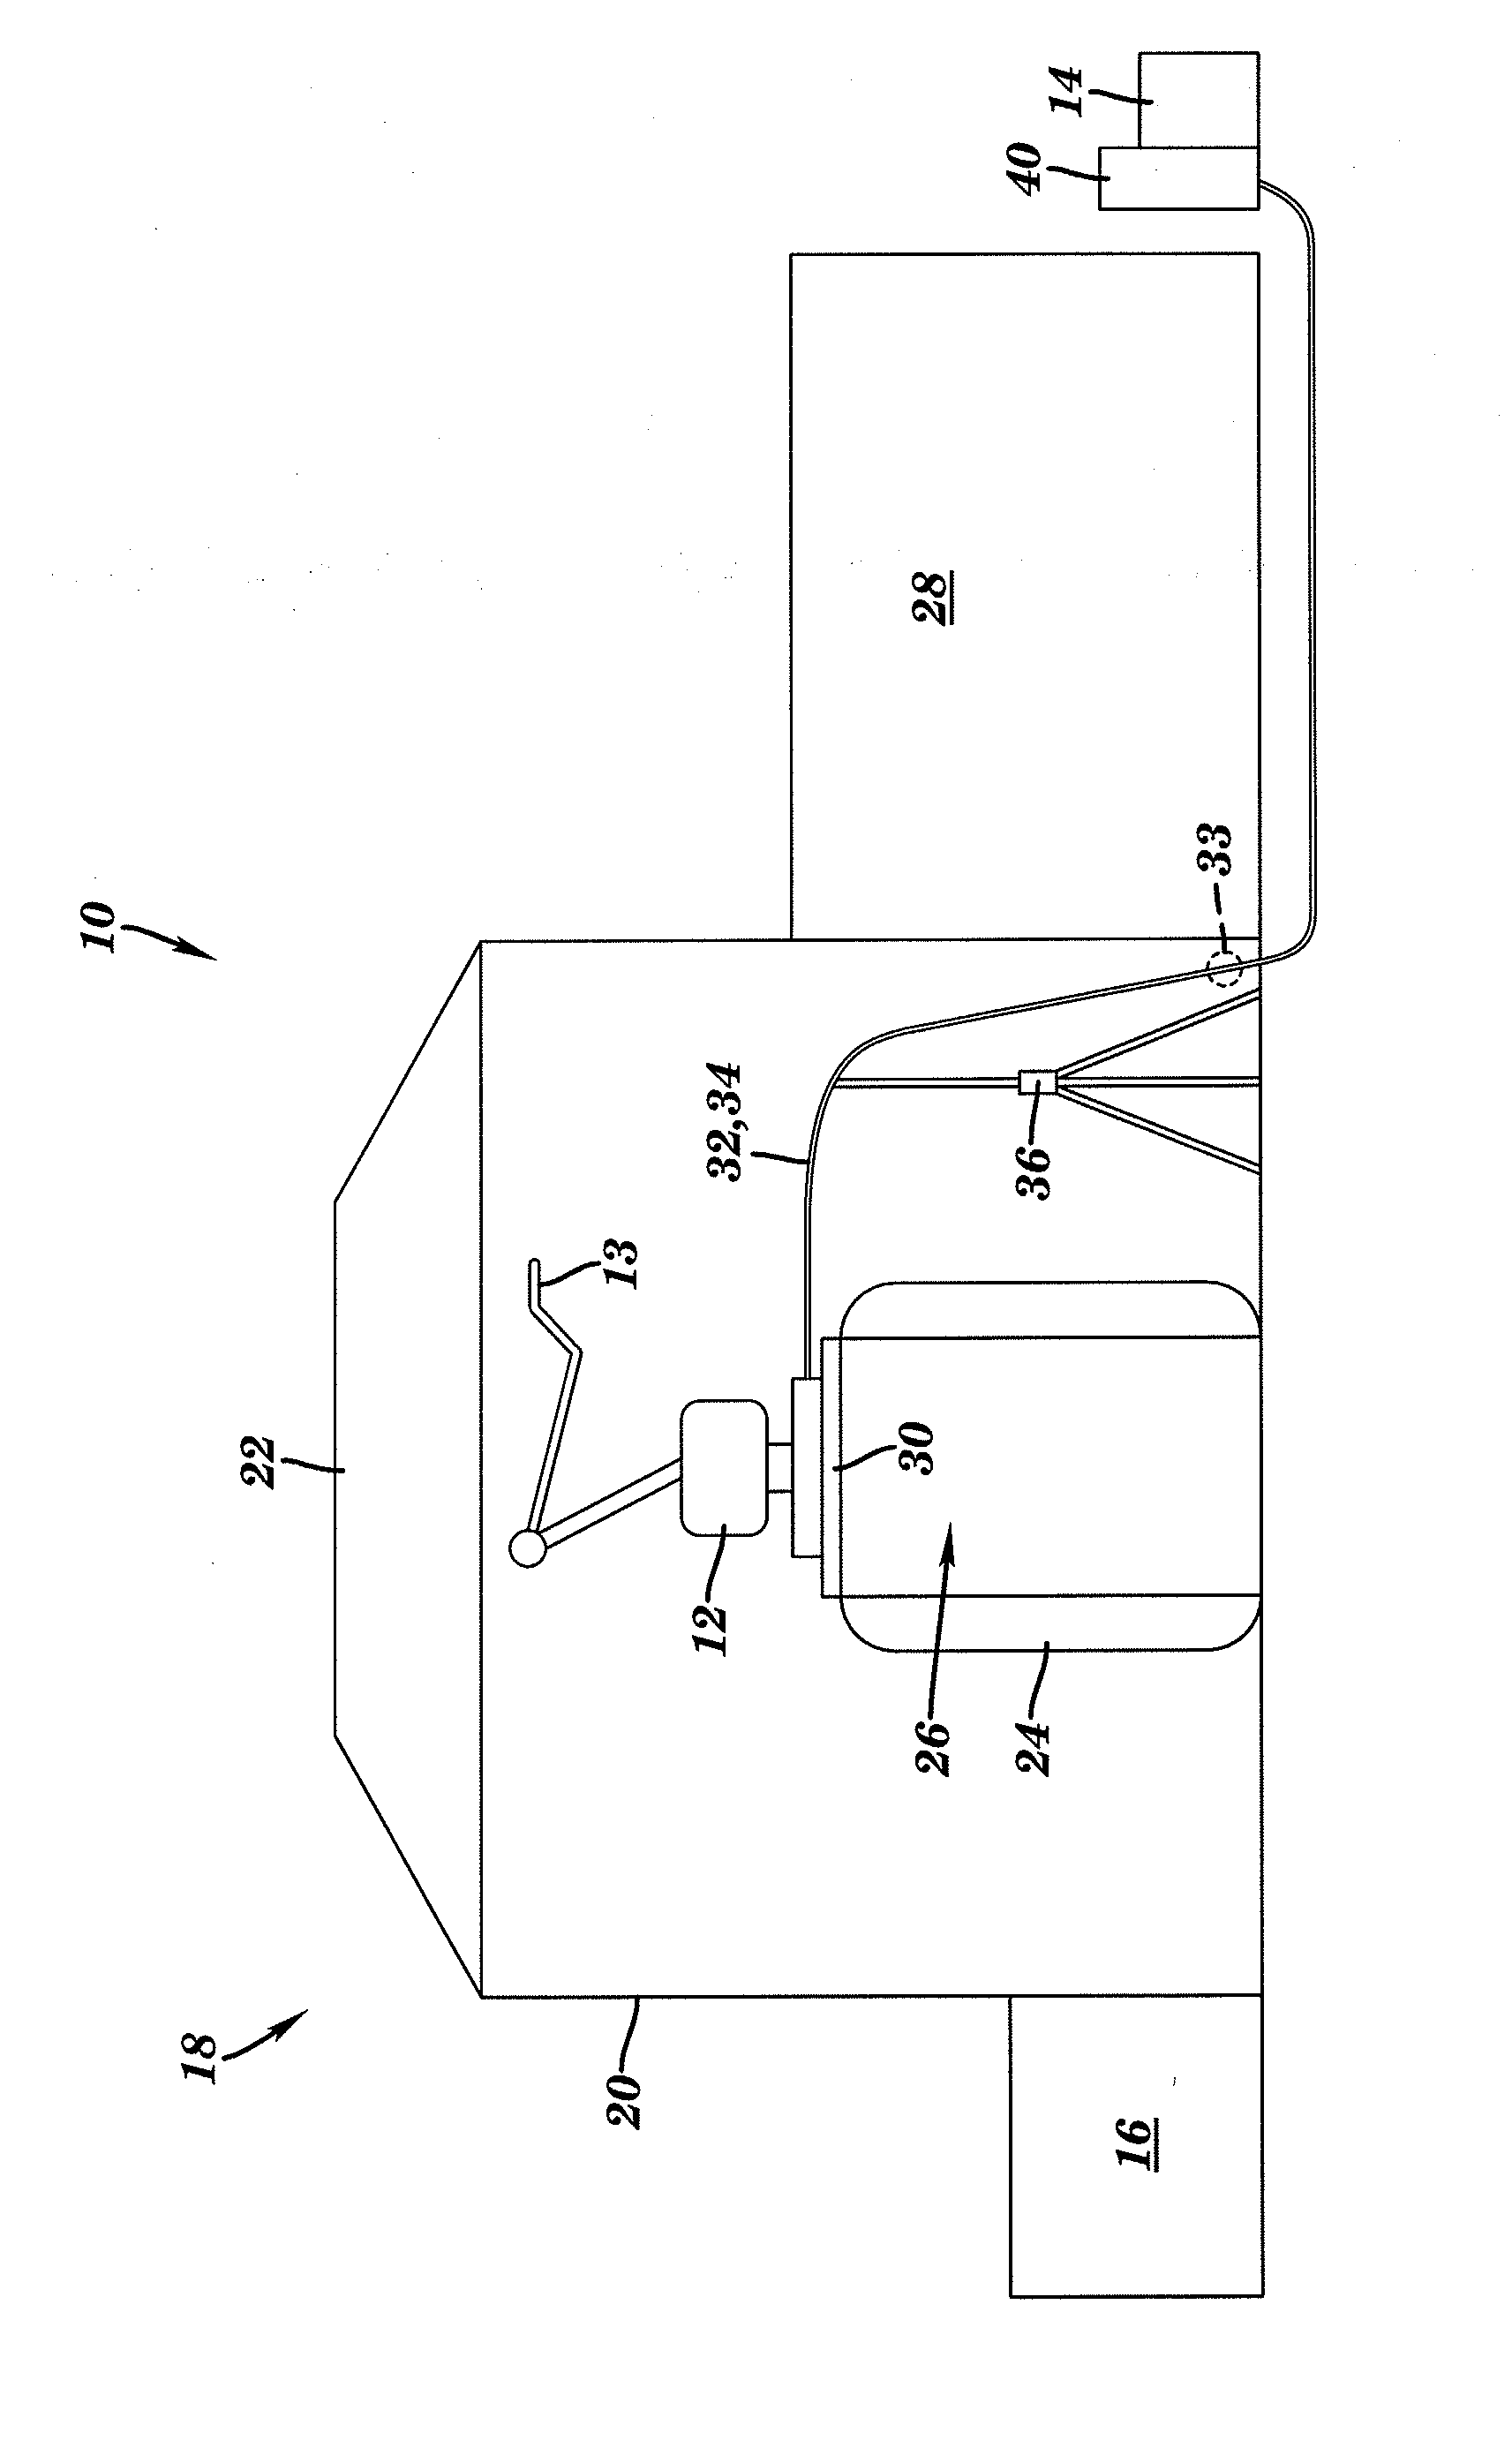 Method and apparatus for removing material from a surface of a metal processing chamber